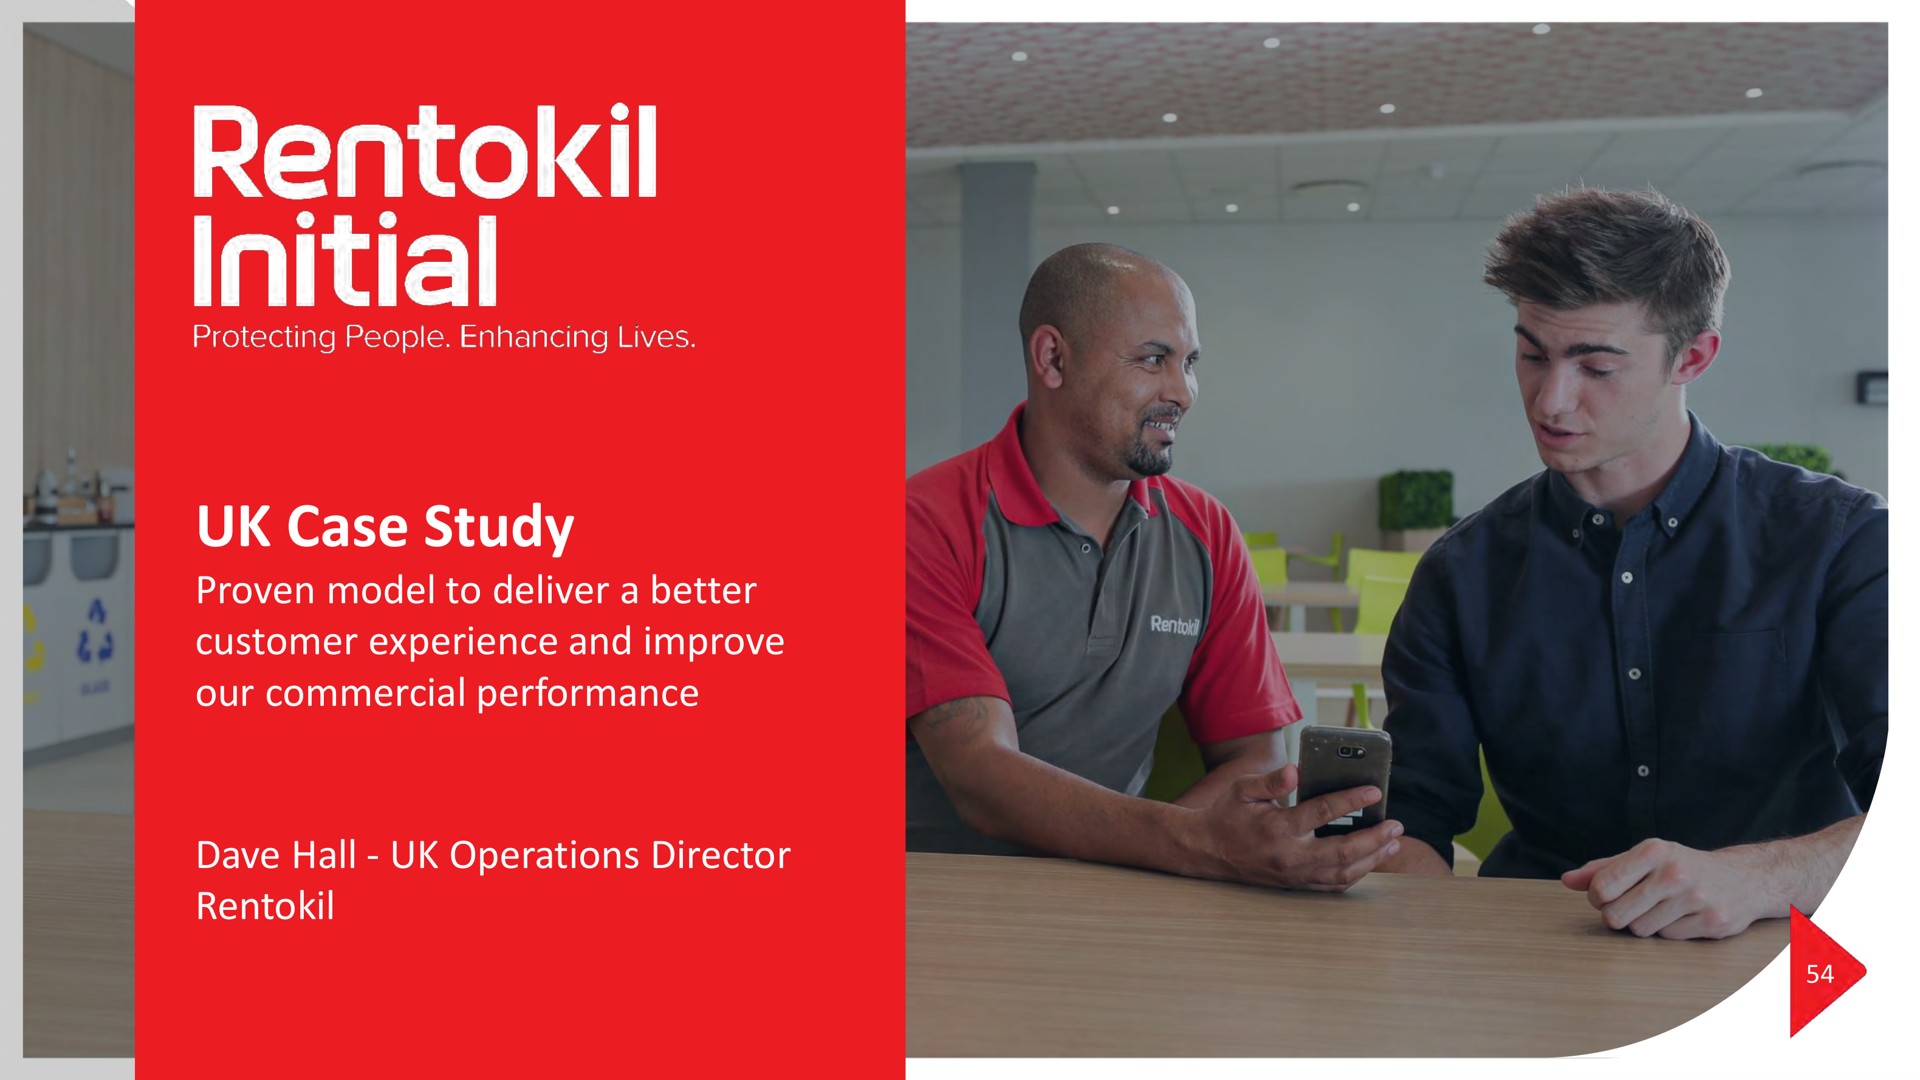 case study proven model to deliver a better customer experience and improve our commercial performance hall operations director initial | Rentokil Initial